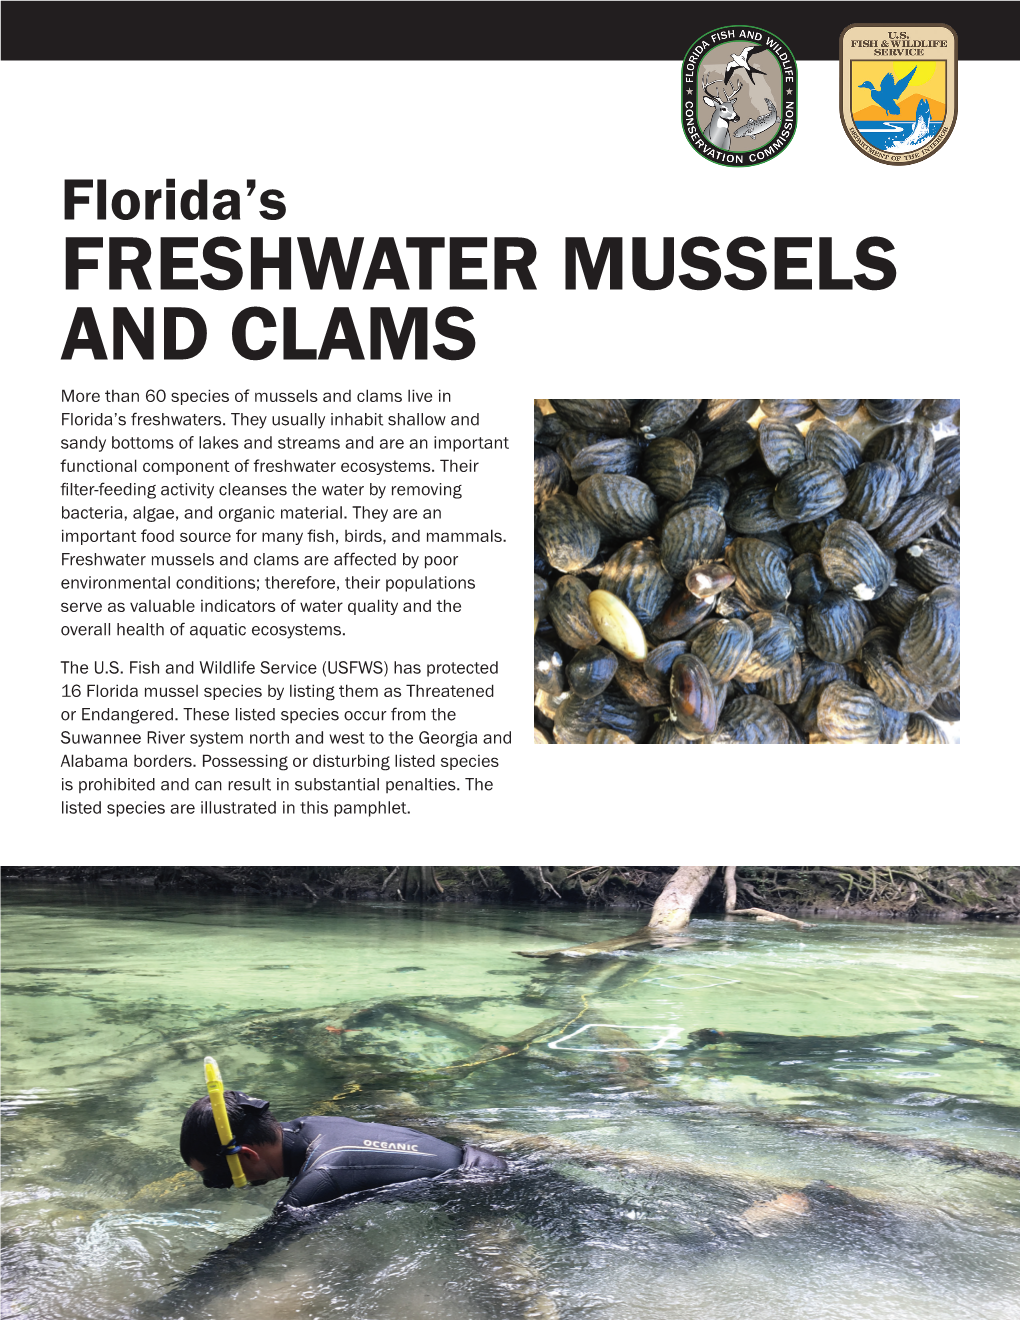 Florida's Freshwater Mussels and Clams